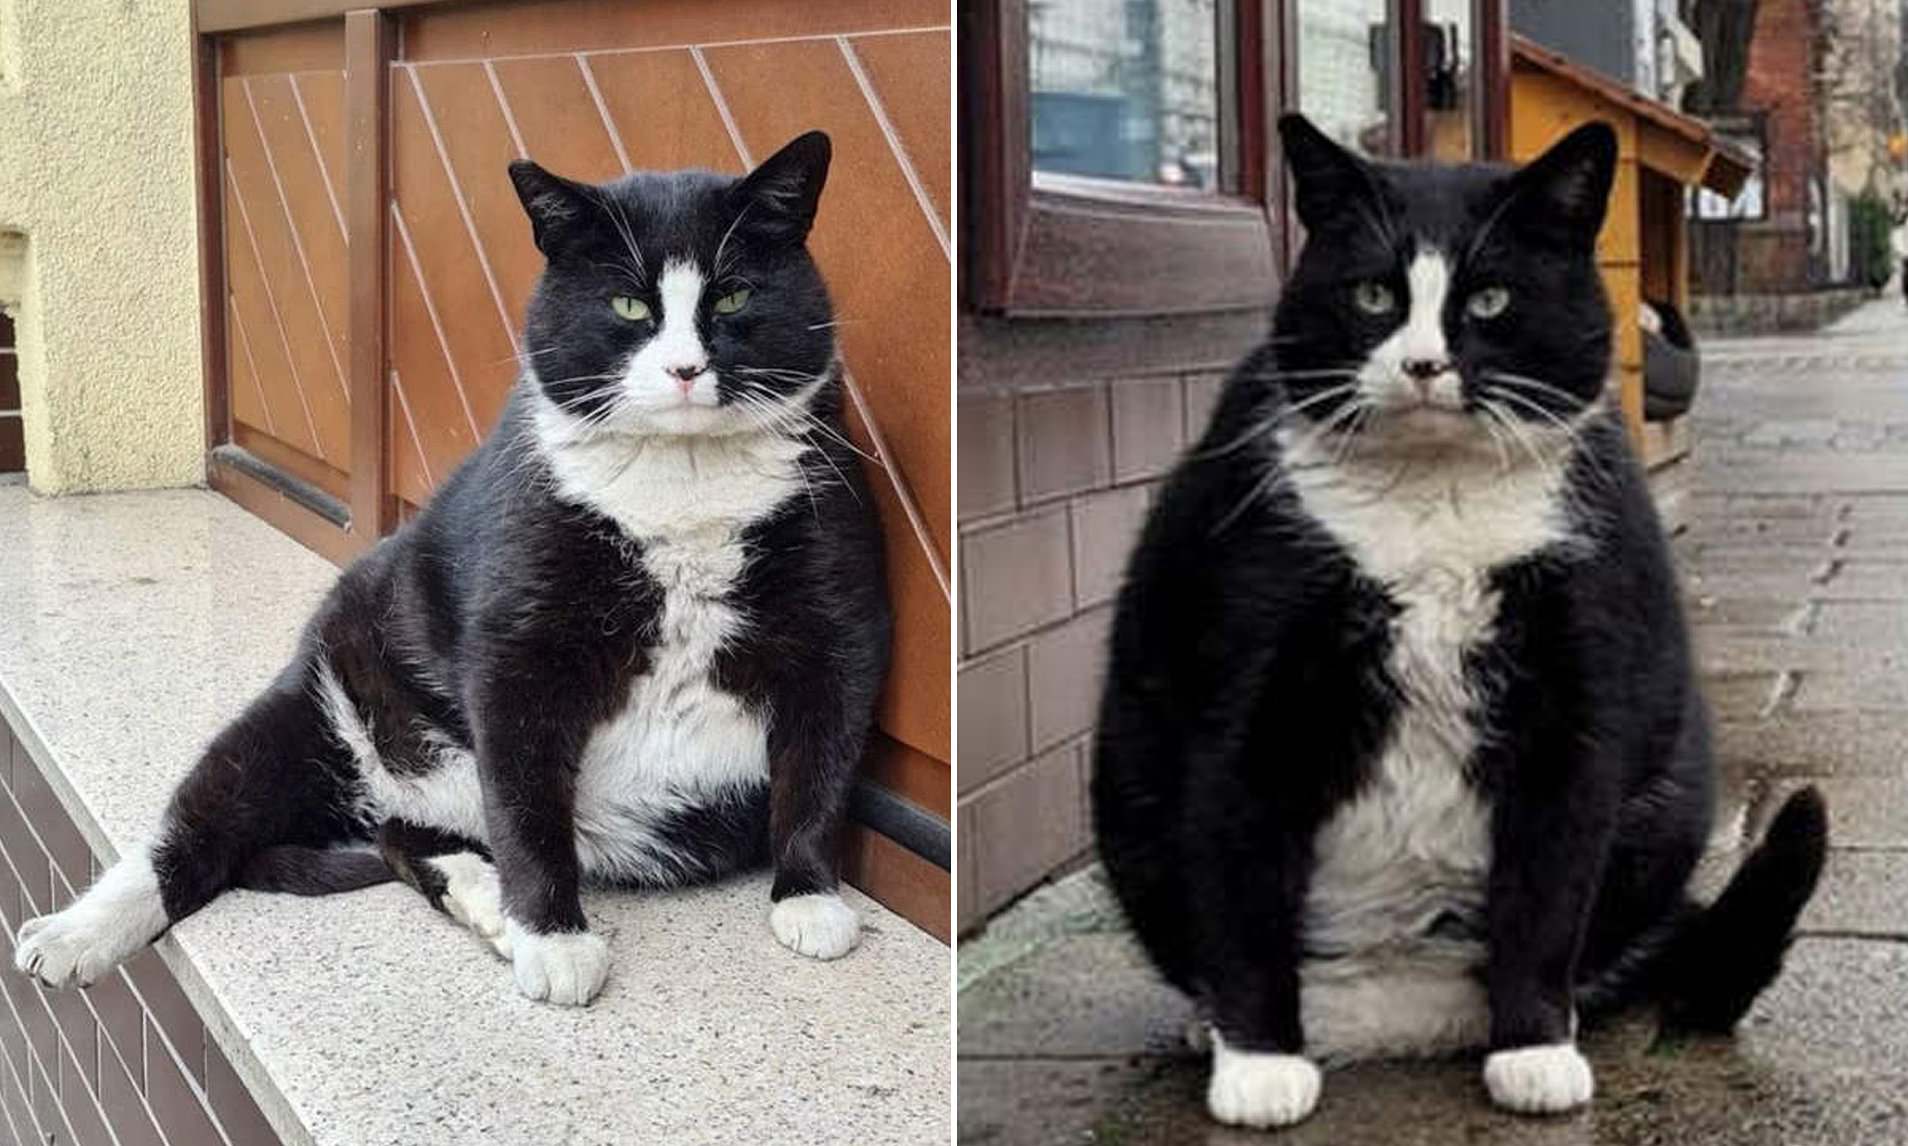 Chonky cat as seen on the street